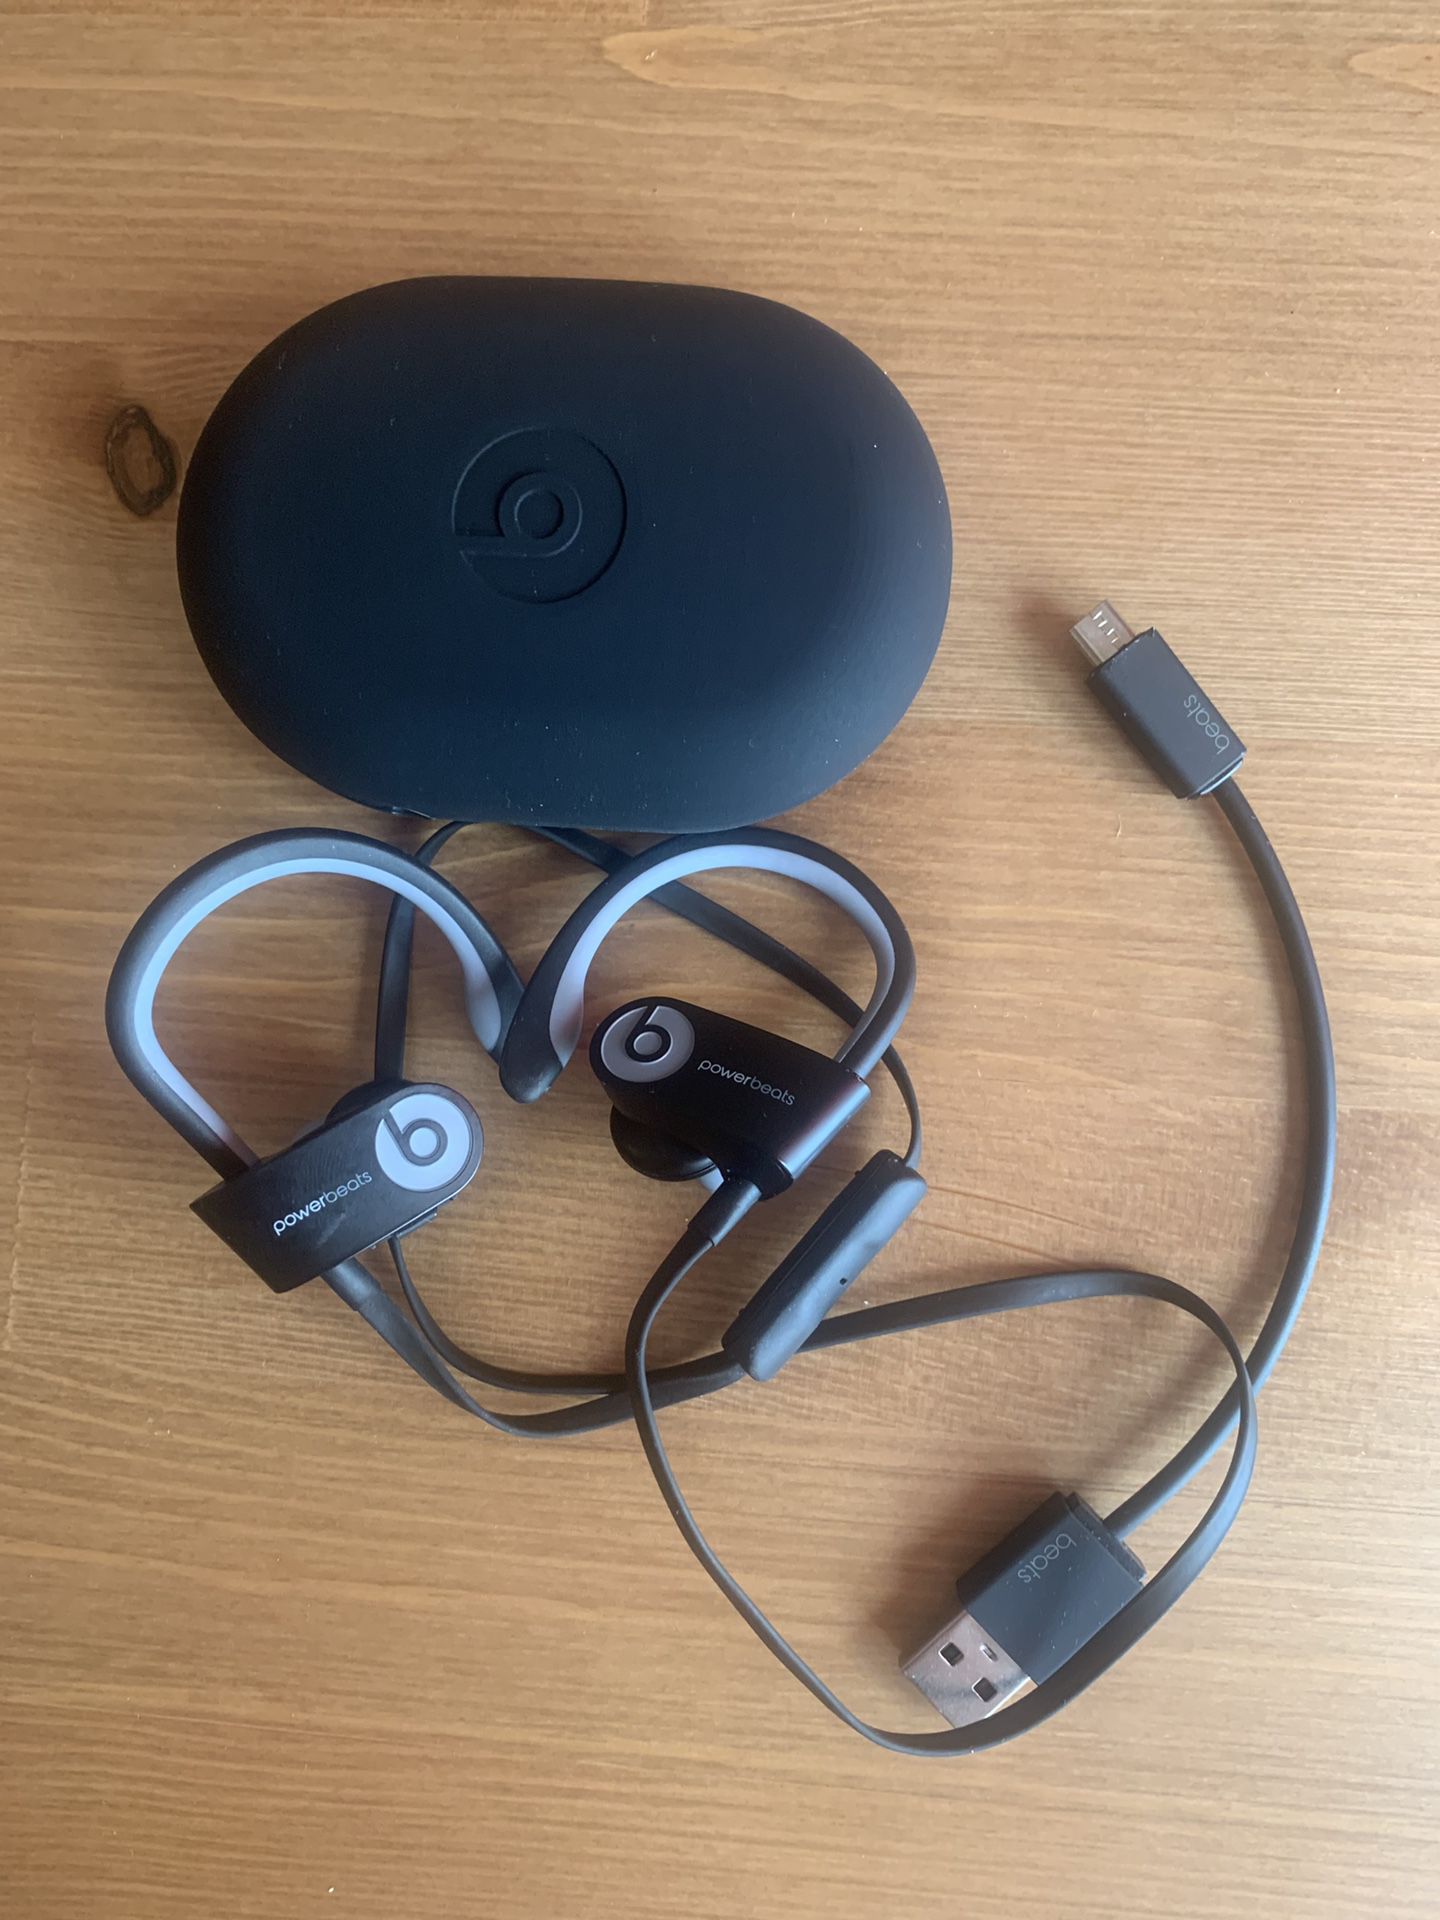 Beats wireless headphones - black and gray - excellent condition